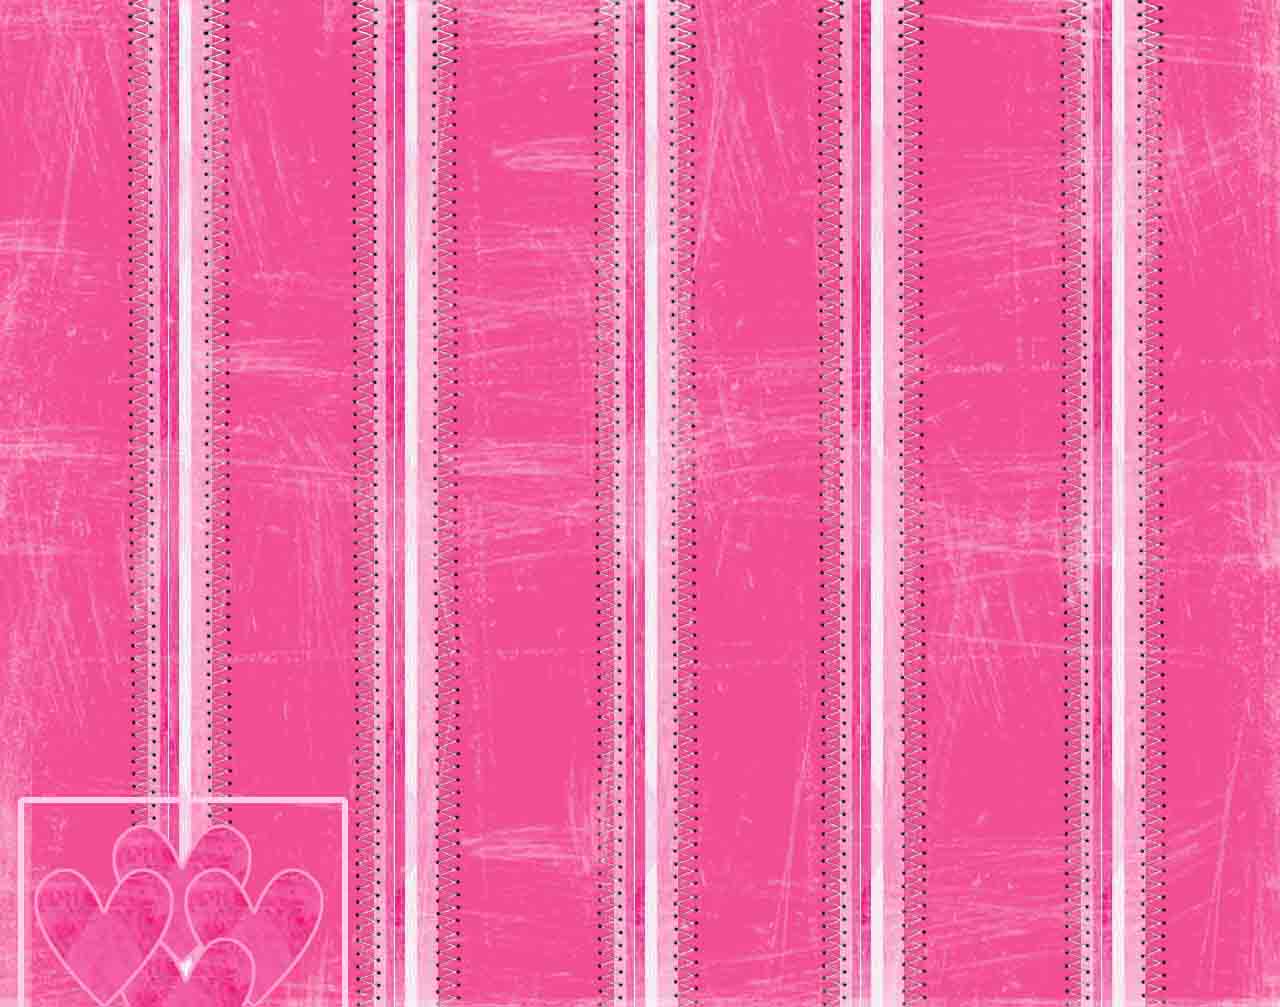 Heart Stitched Backgrounds